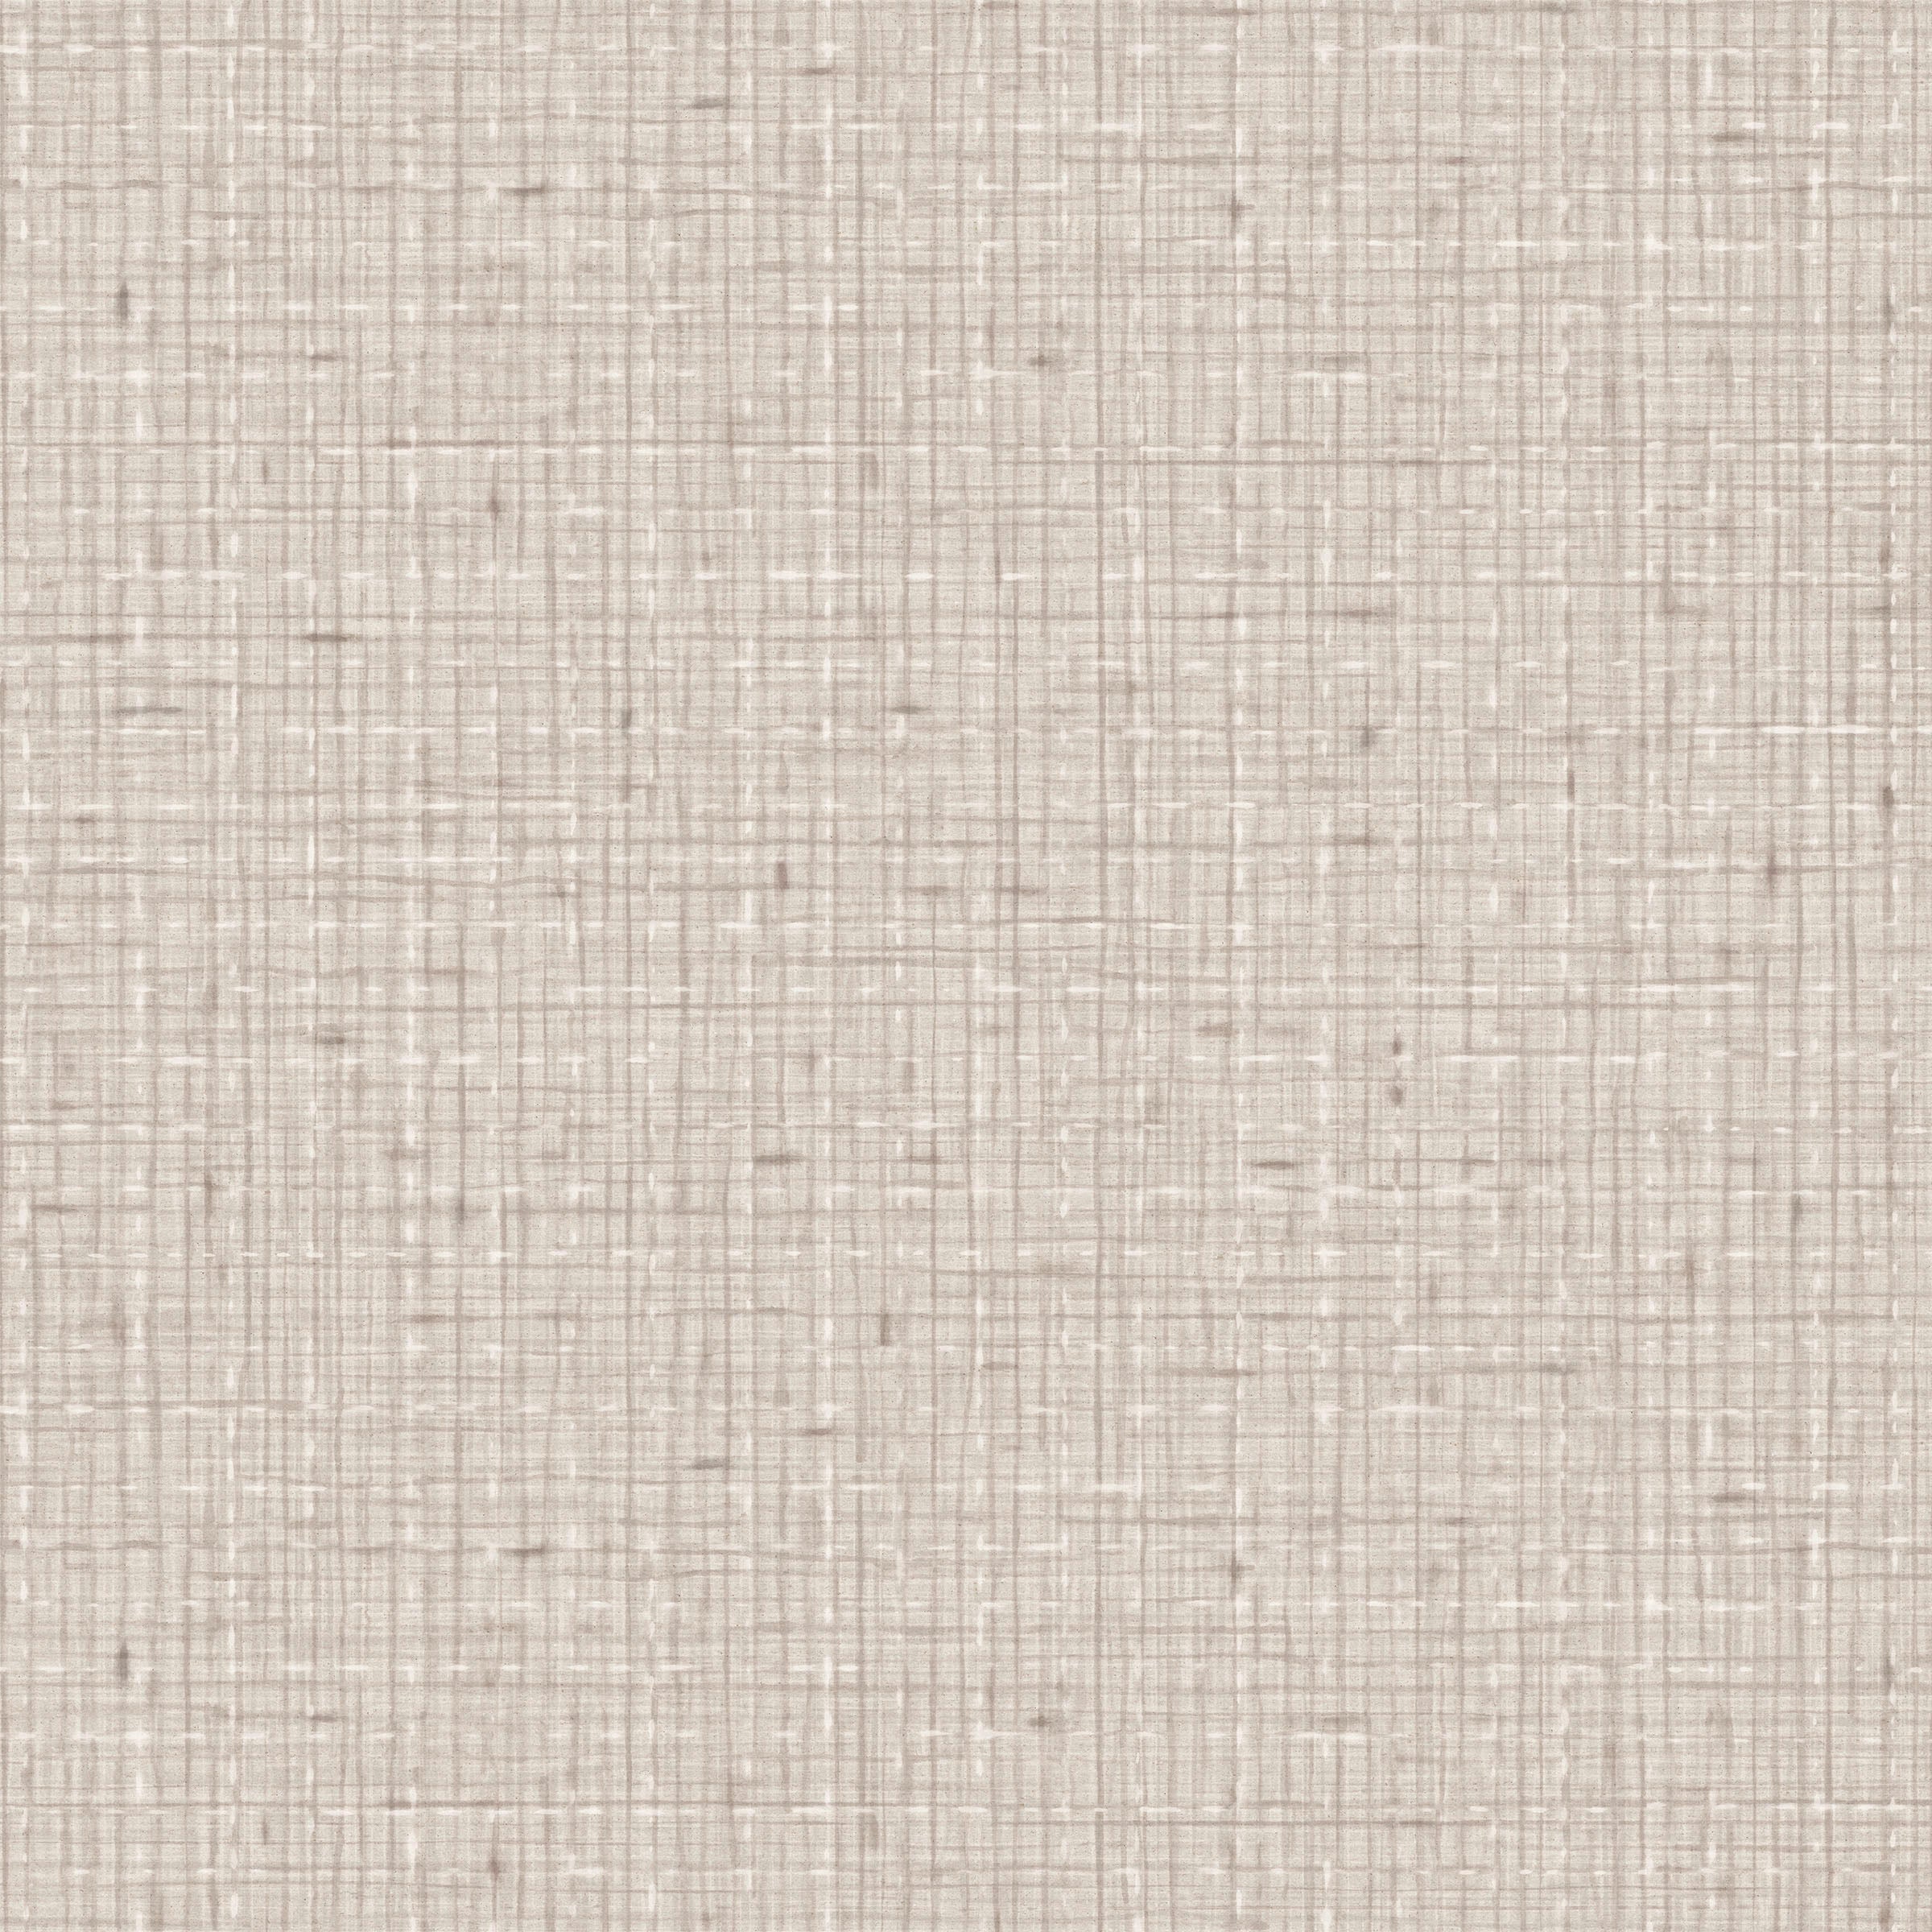 Detail of fabric in a textured tweed pattern in shades of cream and brown.